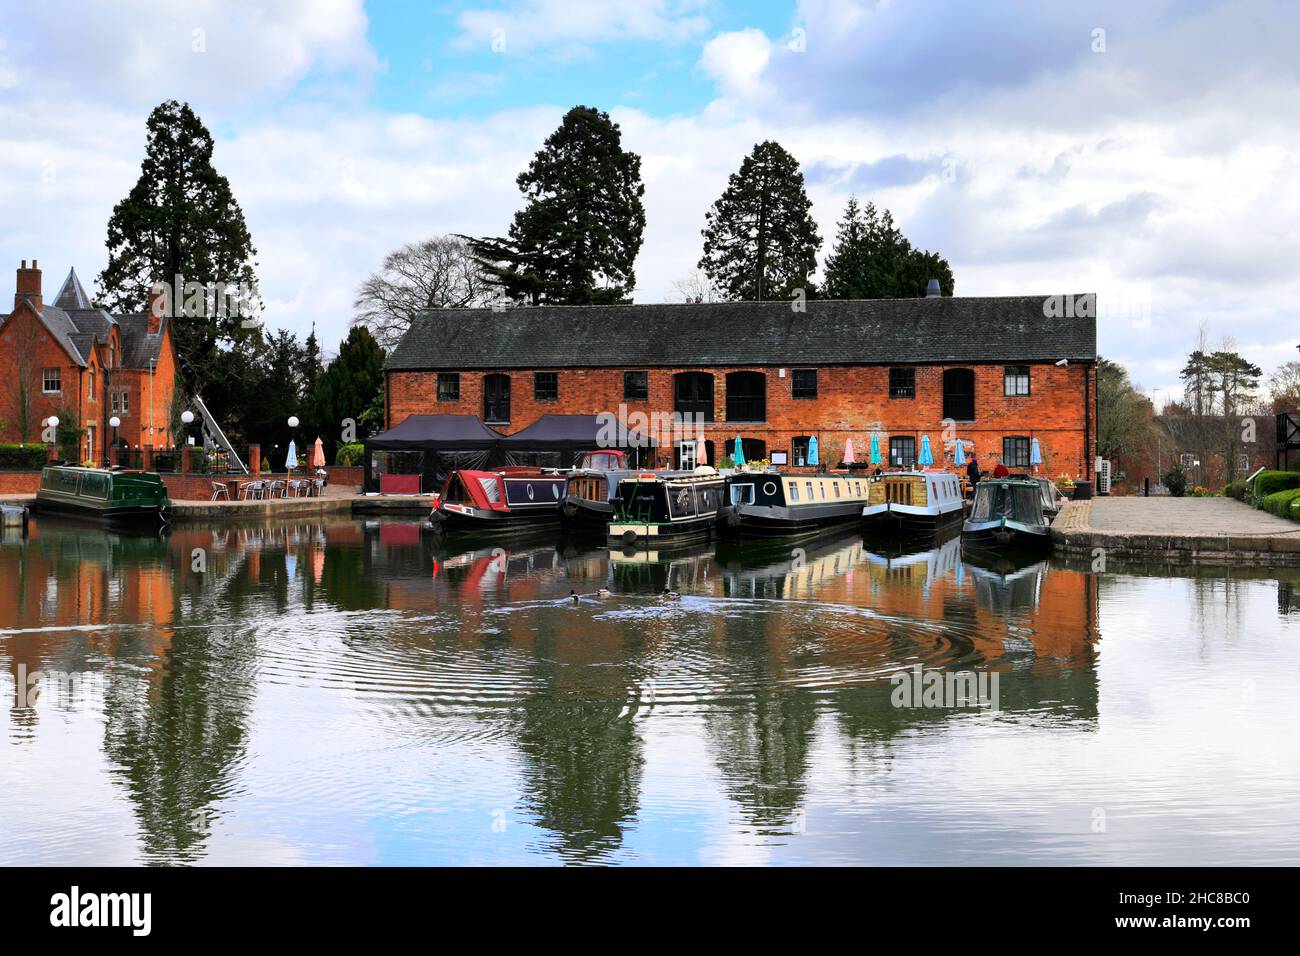 Narrowboats at the Grand Union Canal Basin, Market Harborough town, Leicestershire, England; UK Stock Photo